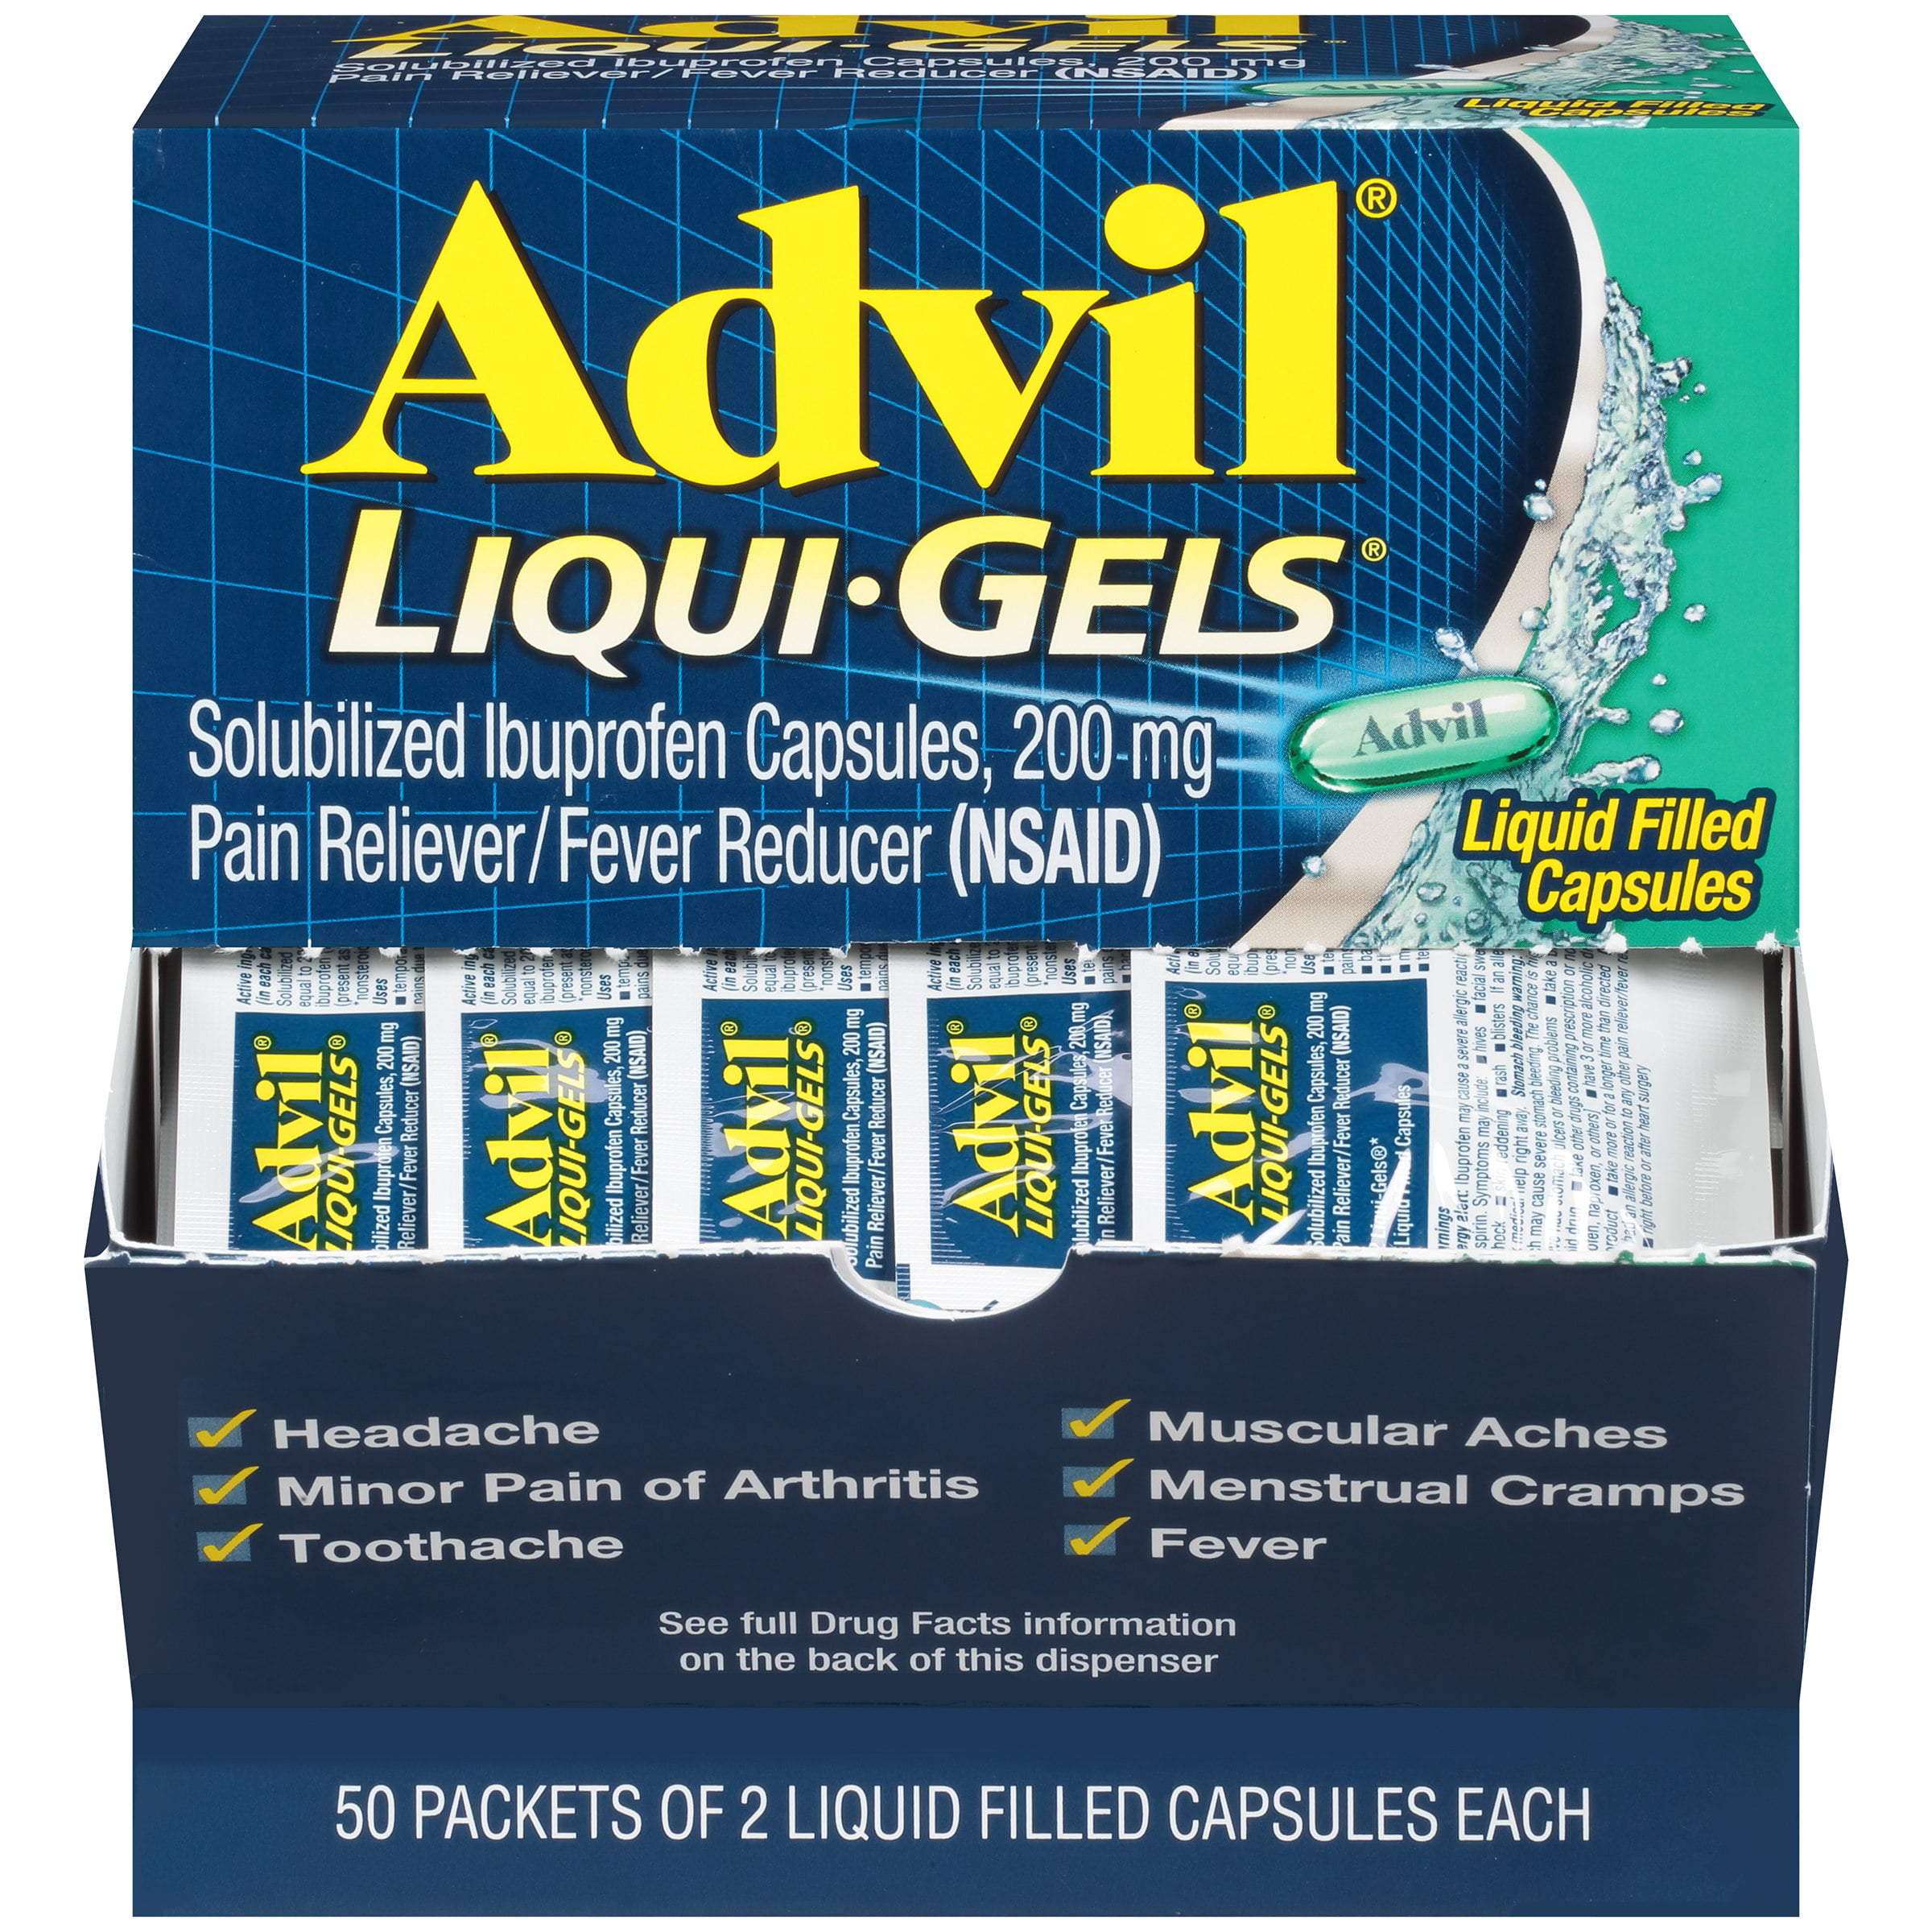 advil liqui-gels (50 packets of 2 capsules) pain reliever / fever